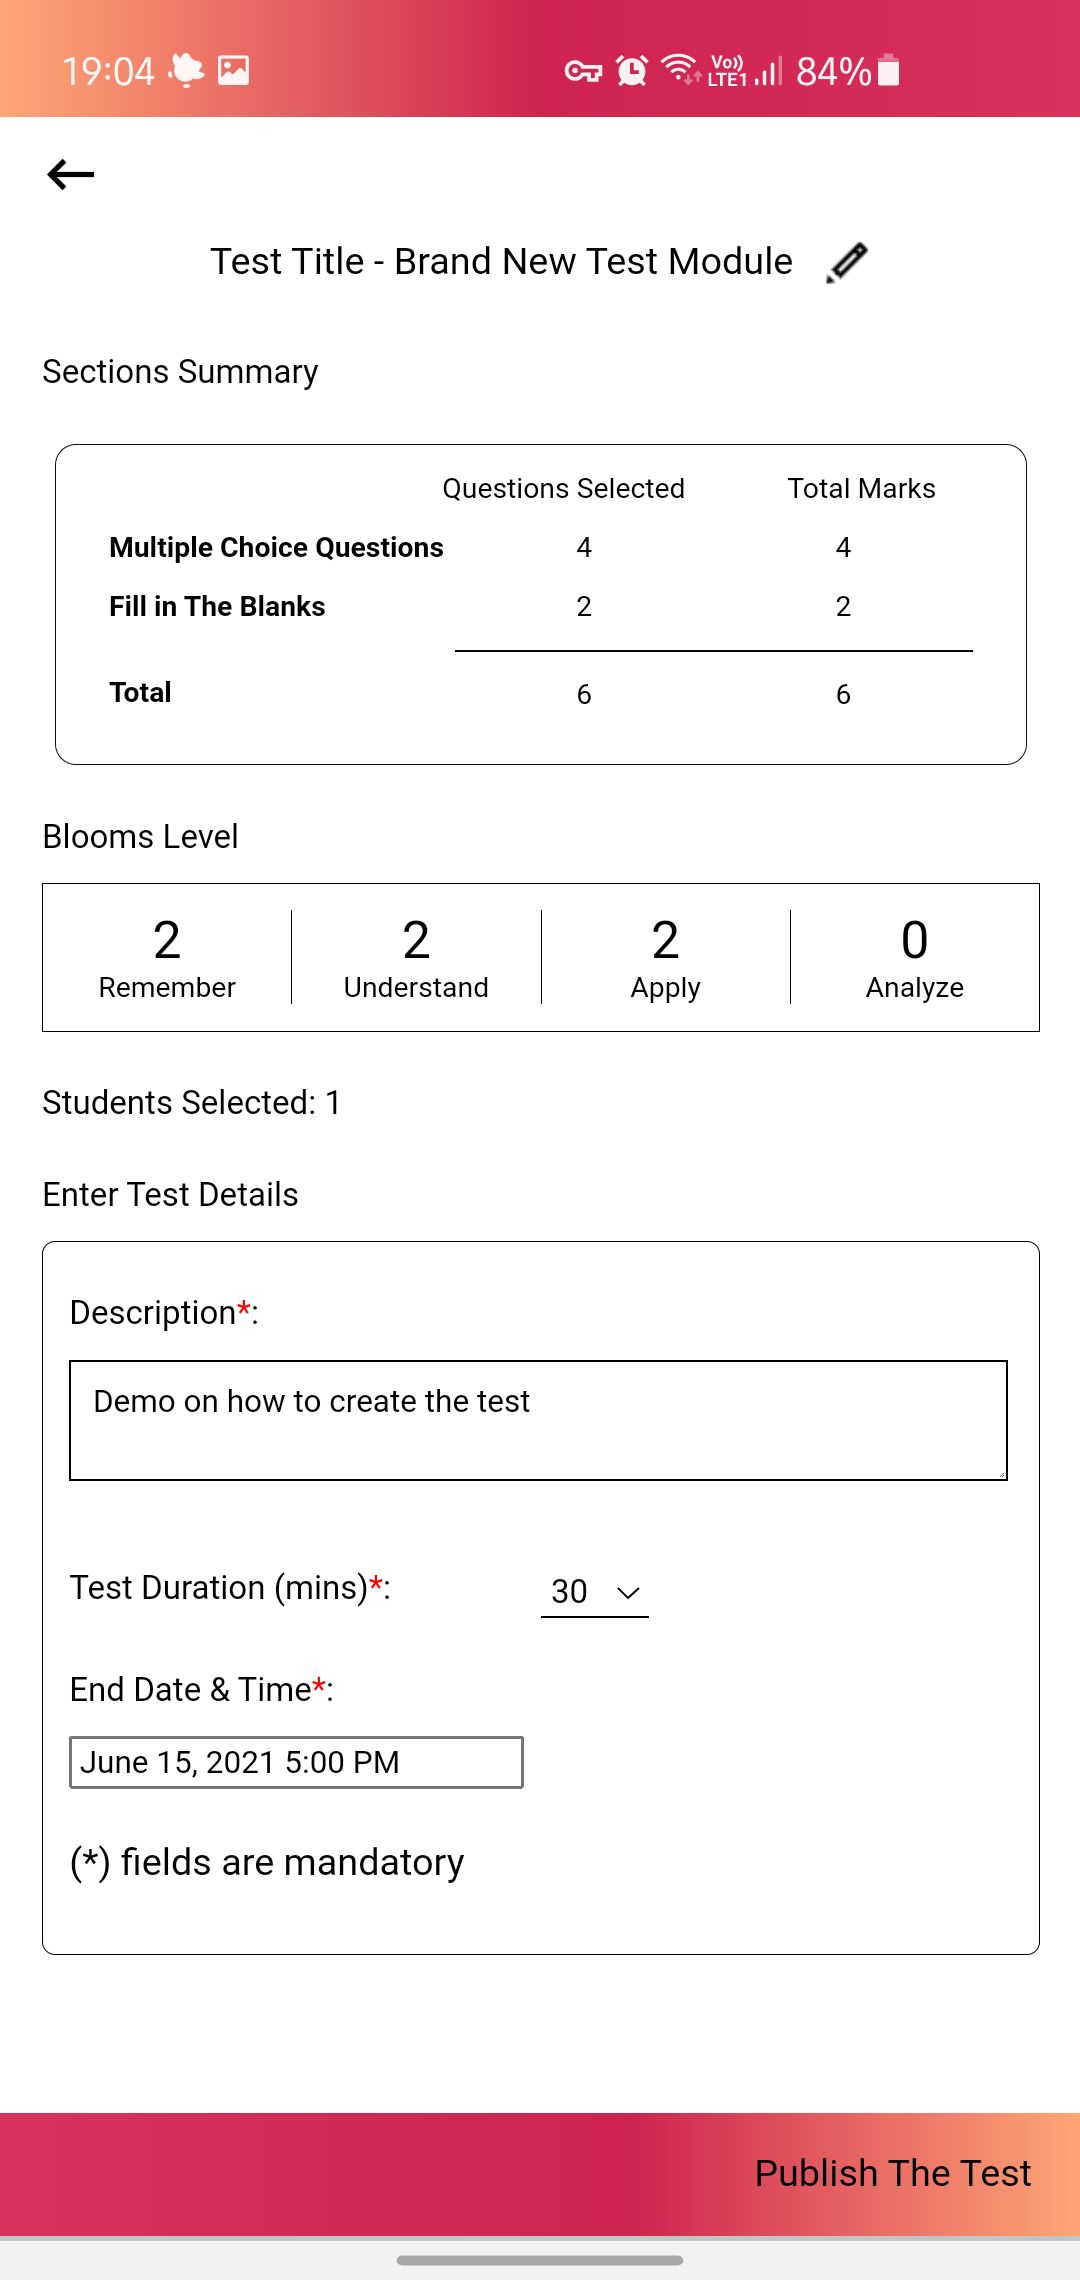 14, Go through the “Sections Summary” and the “Blooms Level” .